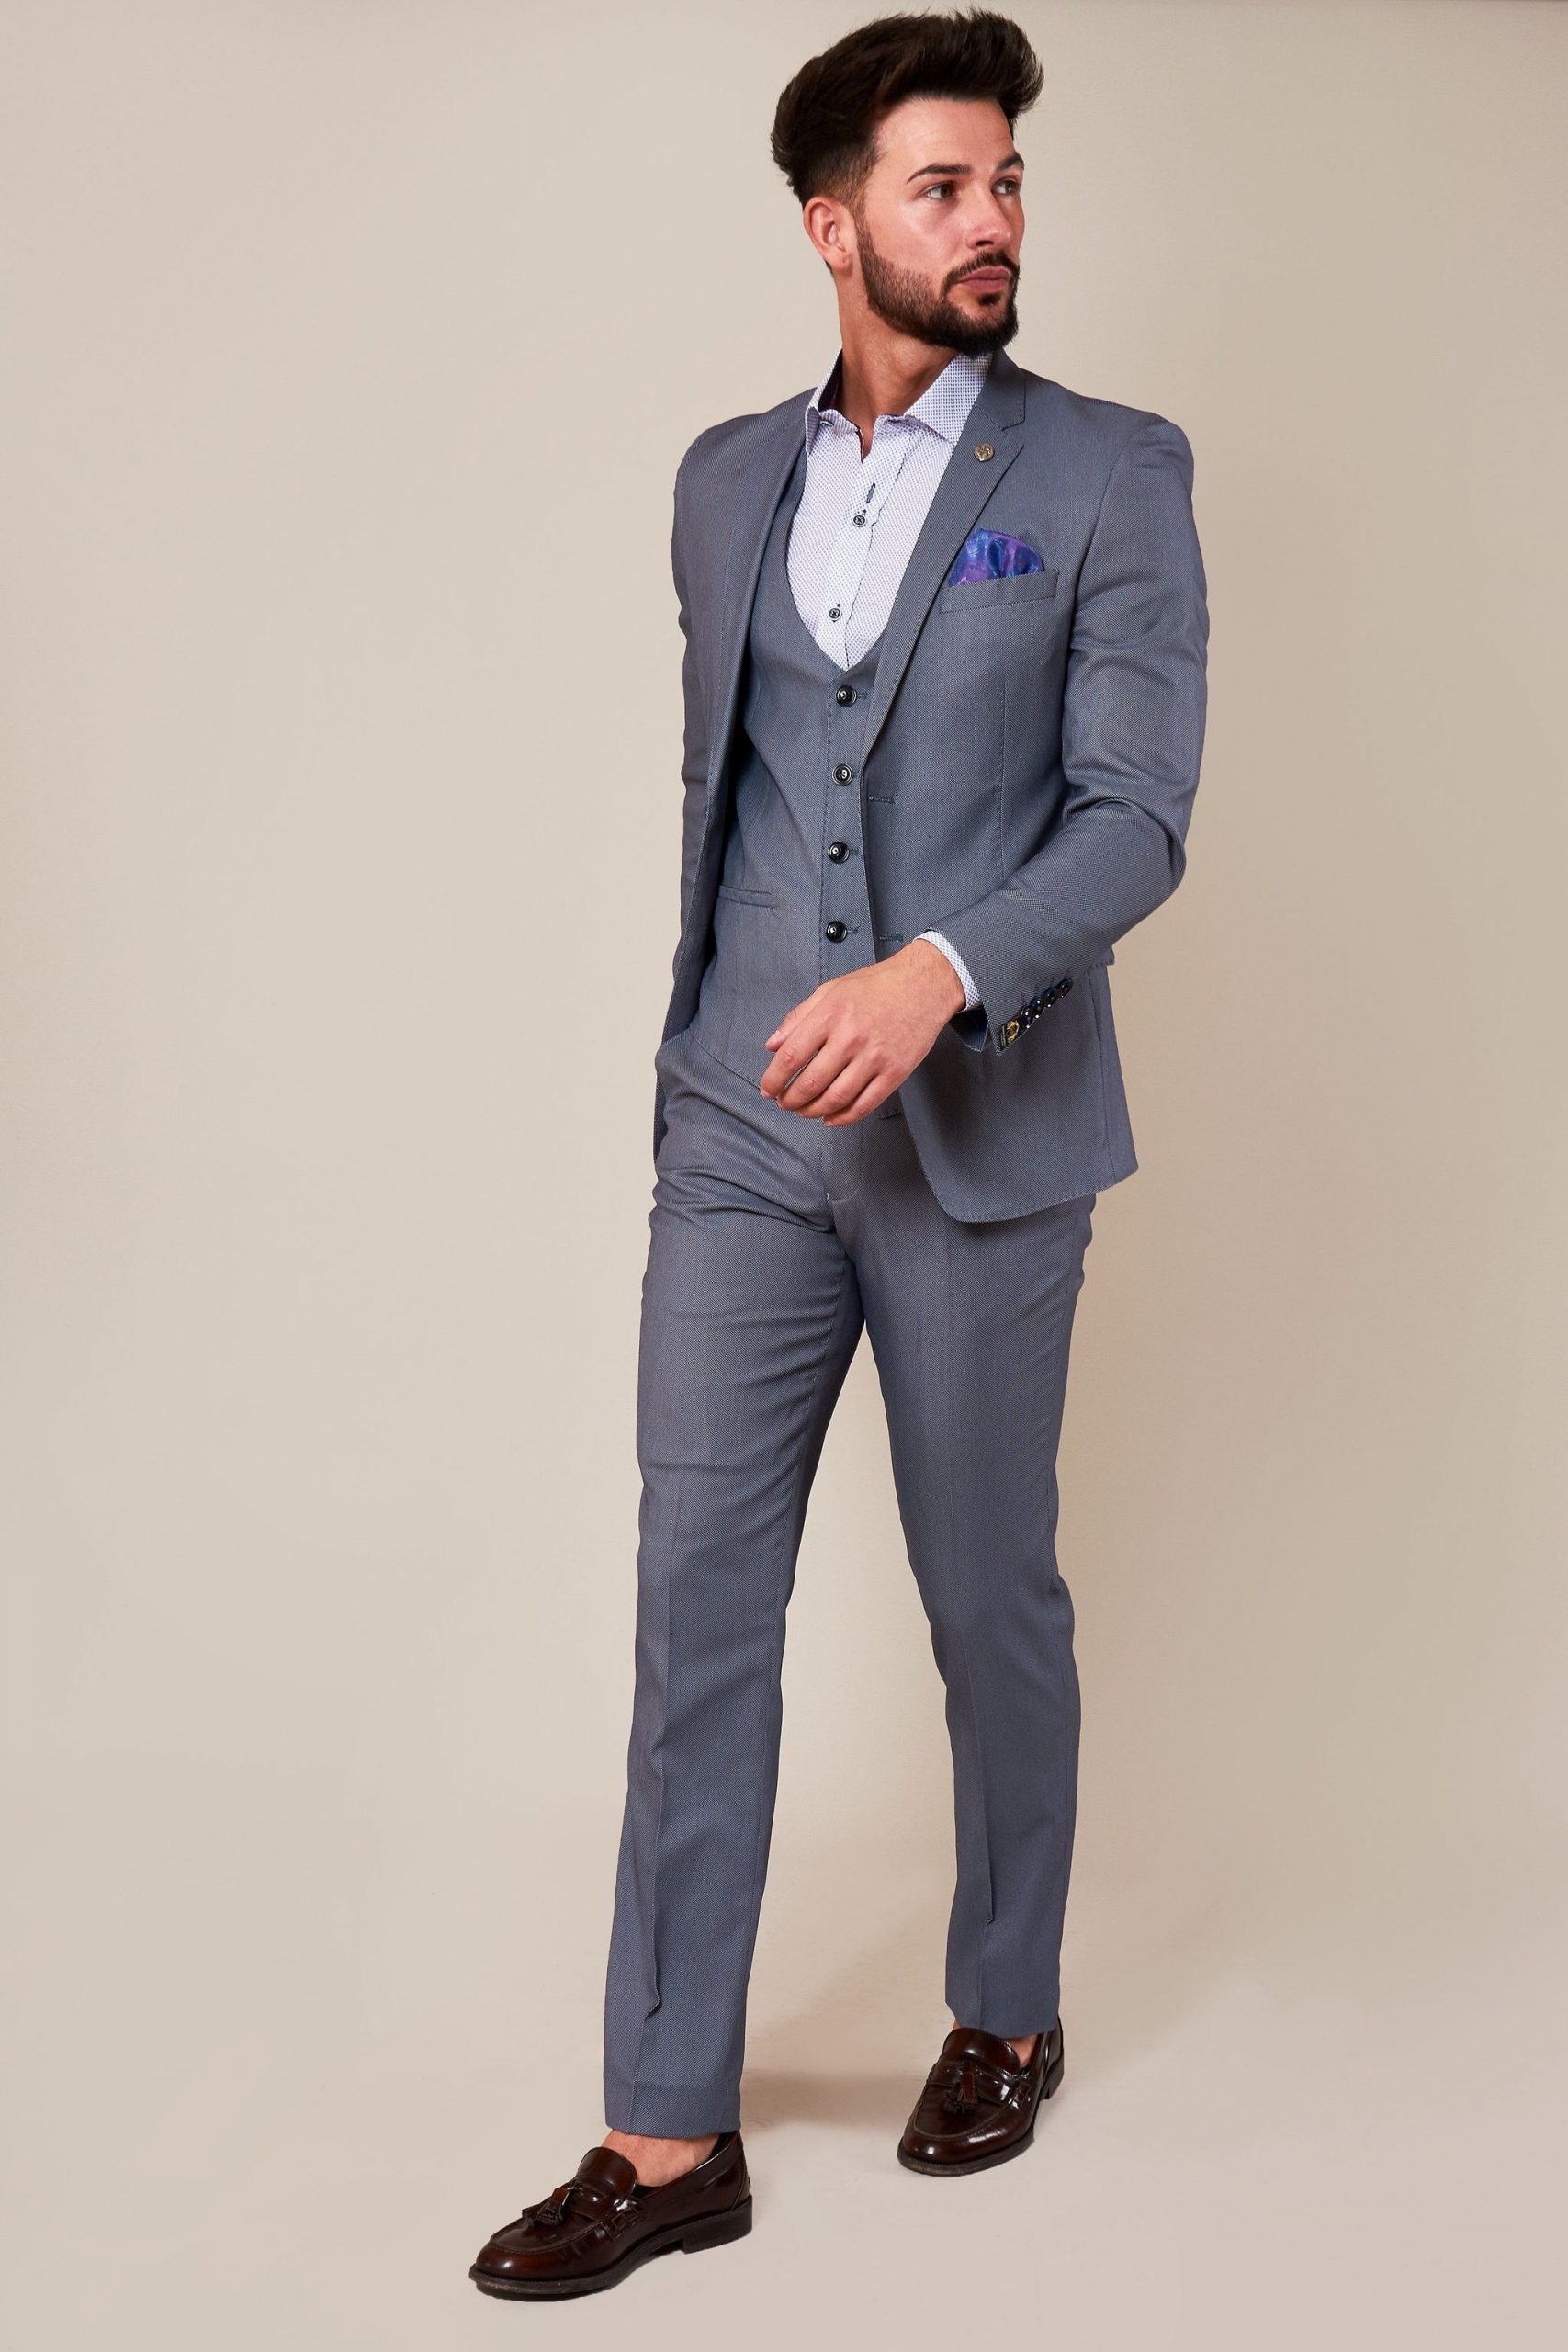 Danny Blue Grey Three Piece Suit With Single Breasted Waistcoat